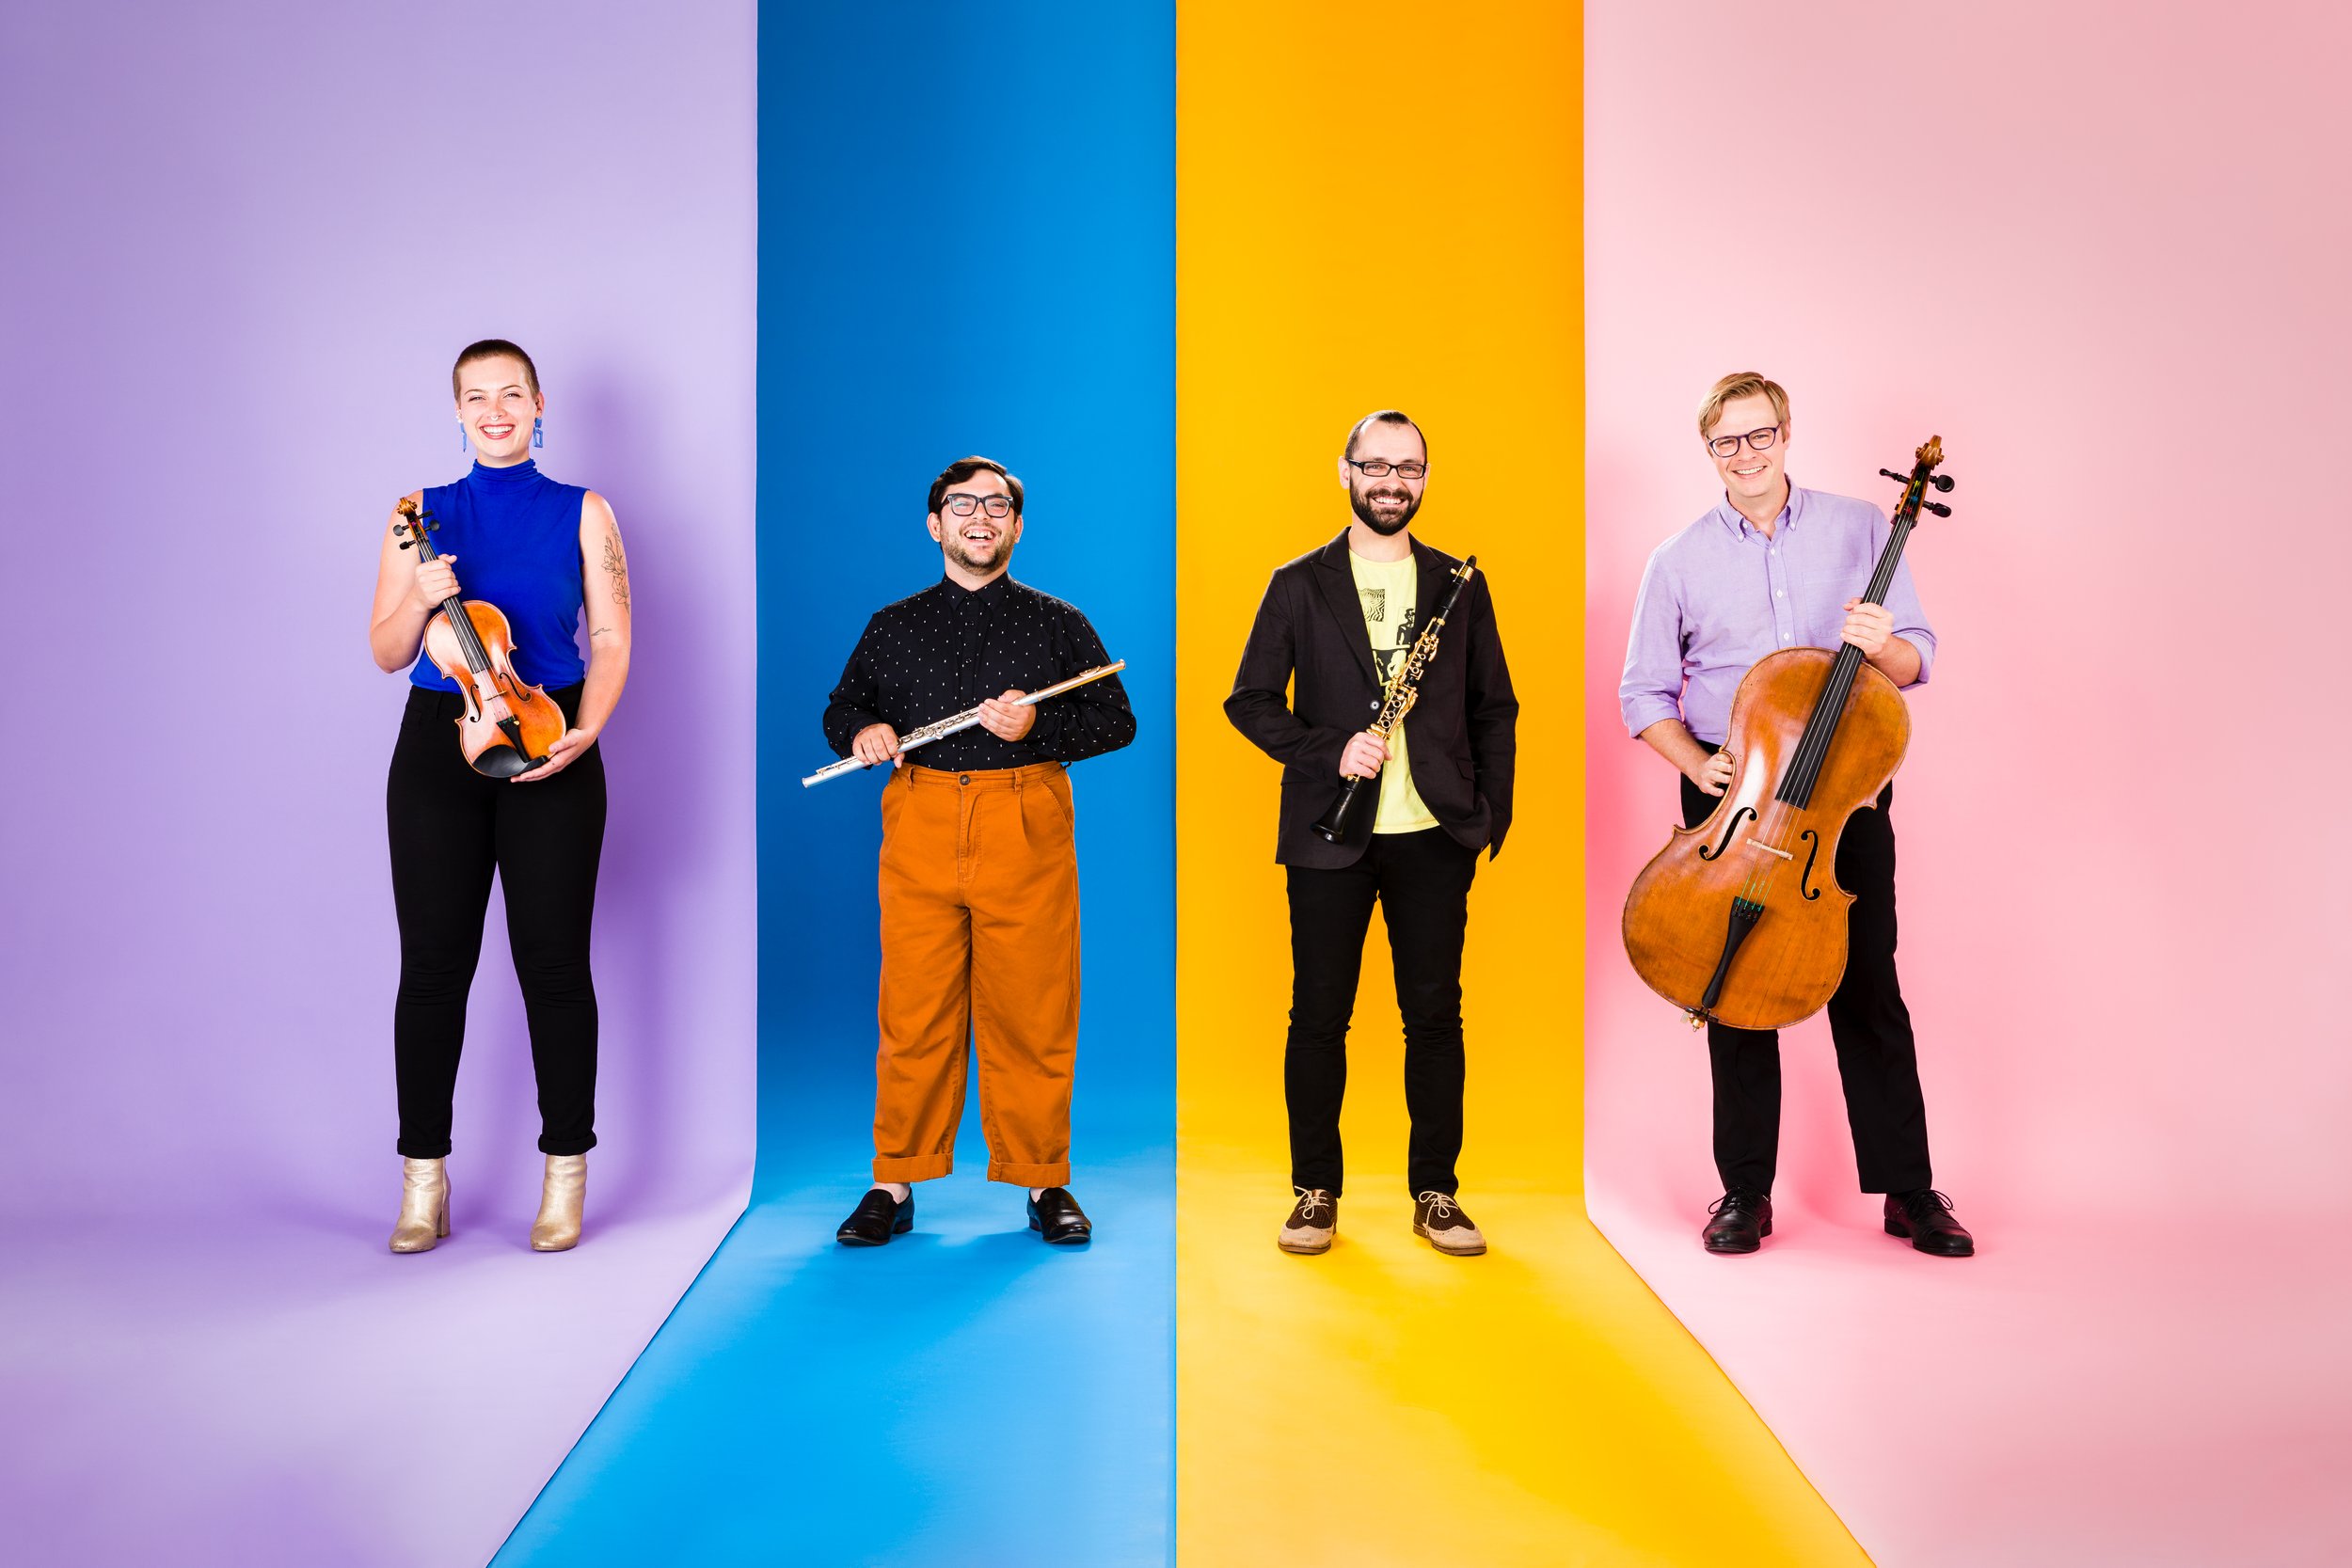 A group of musicians standing in front of a multi-colored background